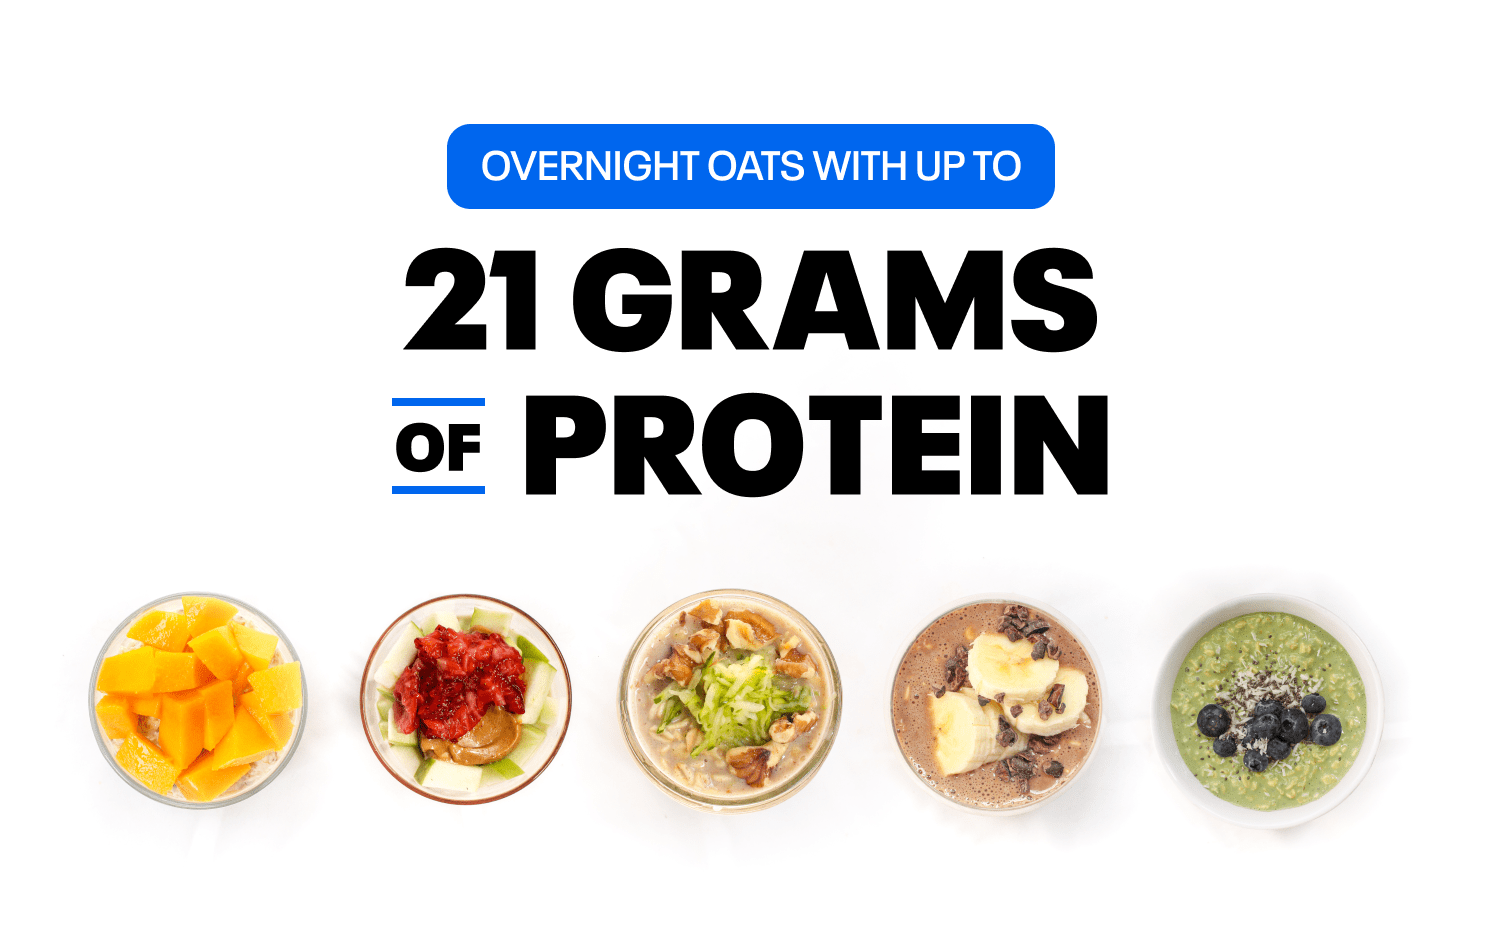 Overnight Oats With up to 21 Grams of Protein